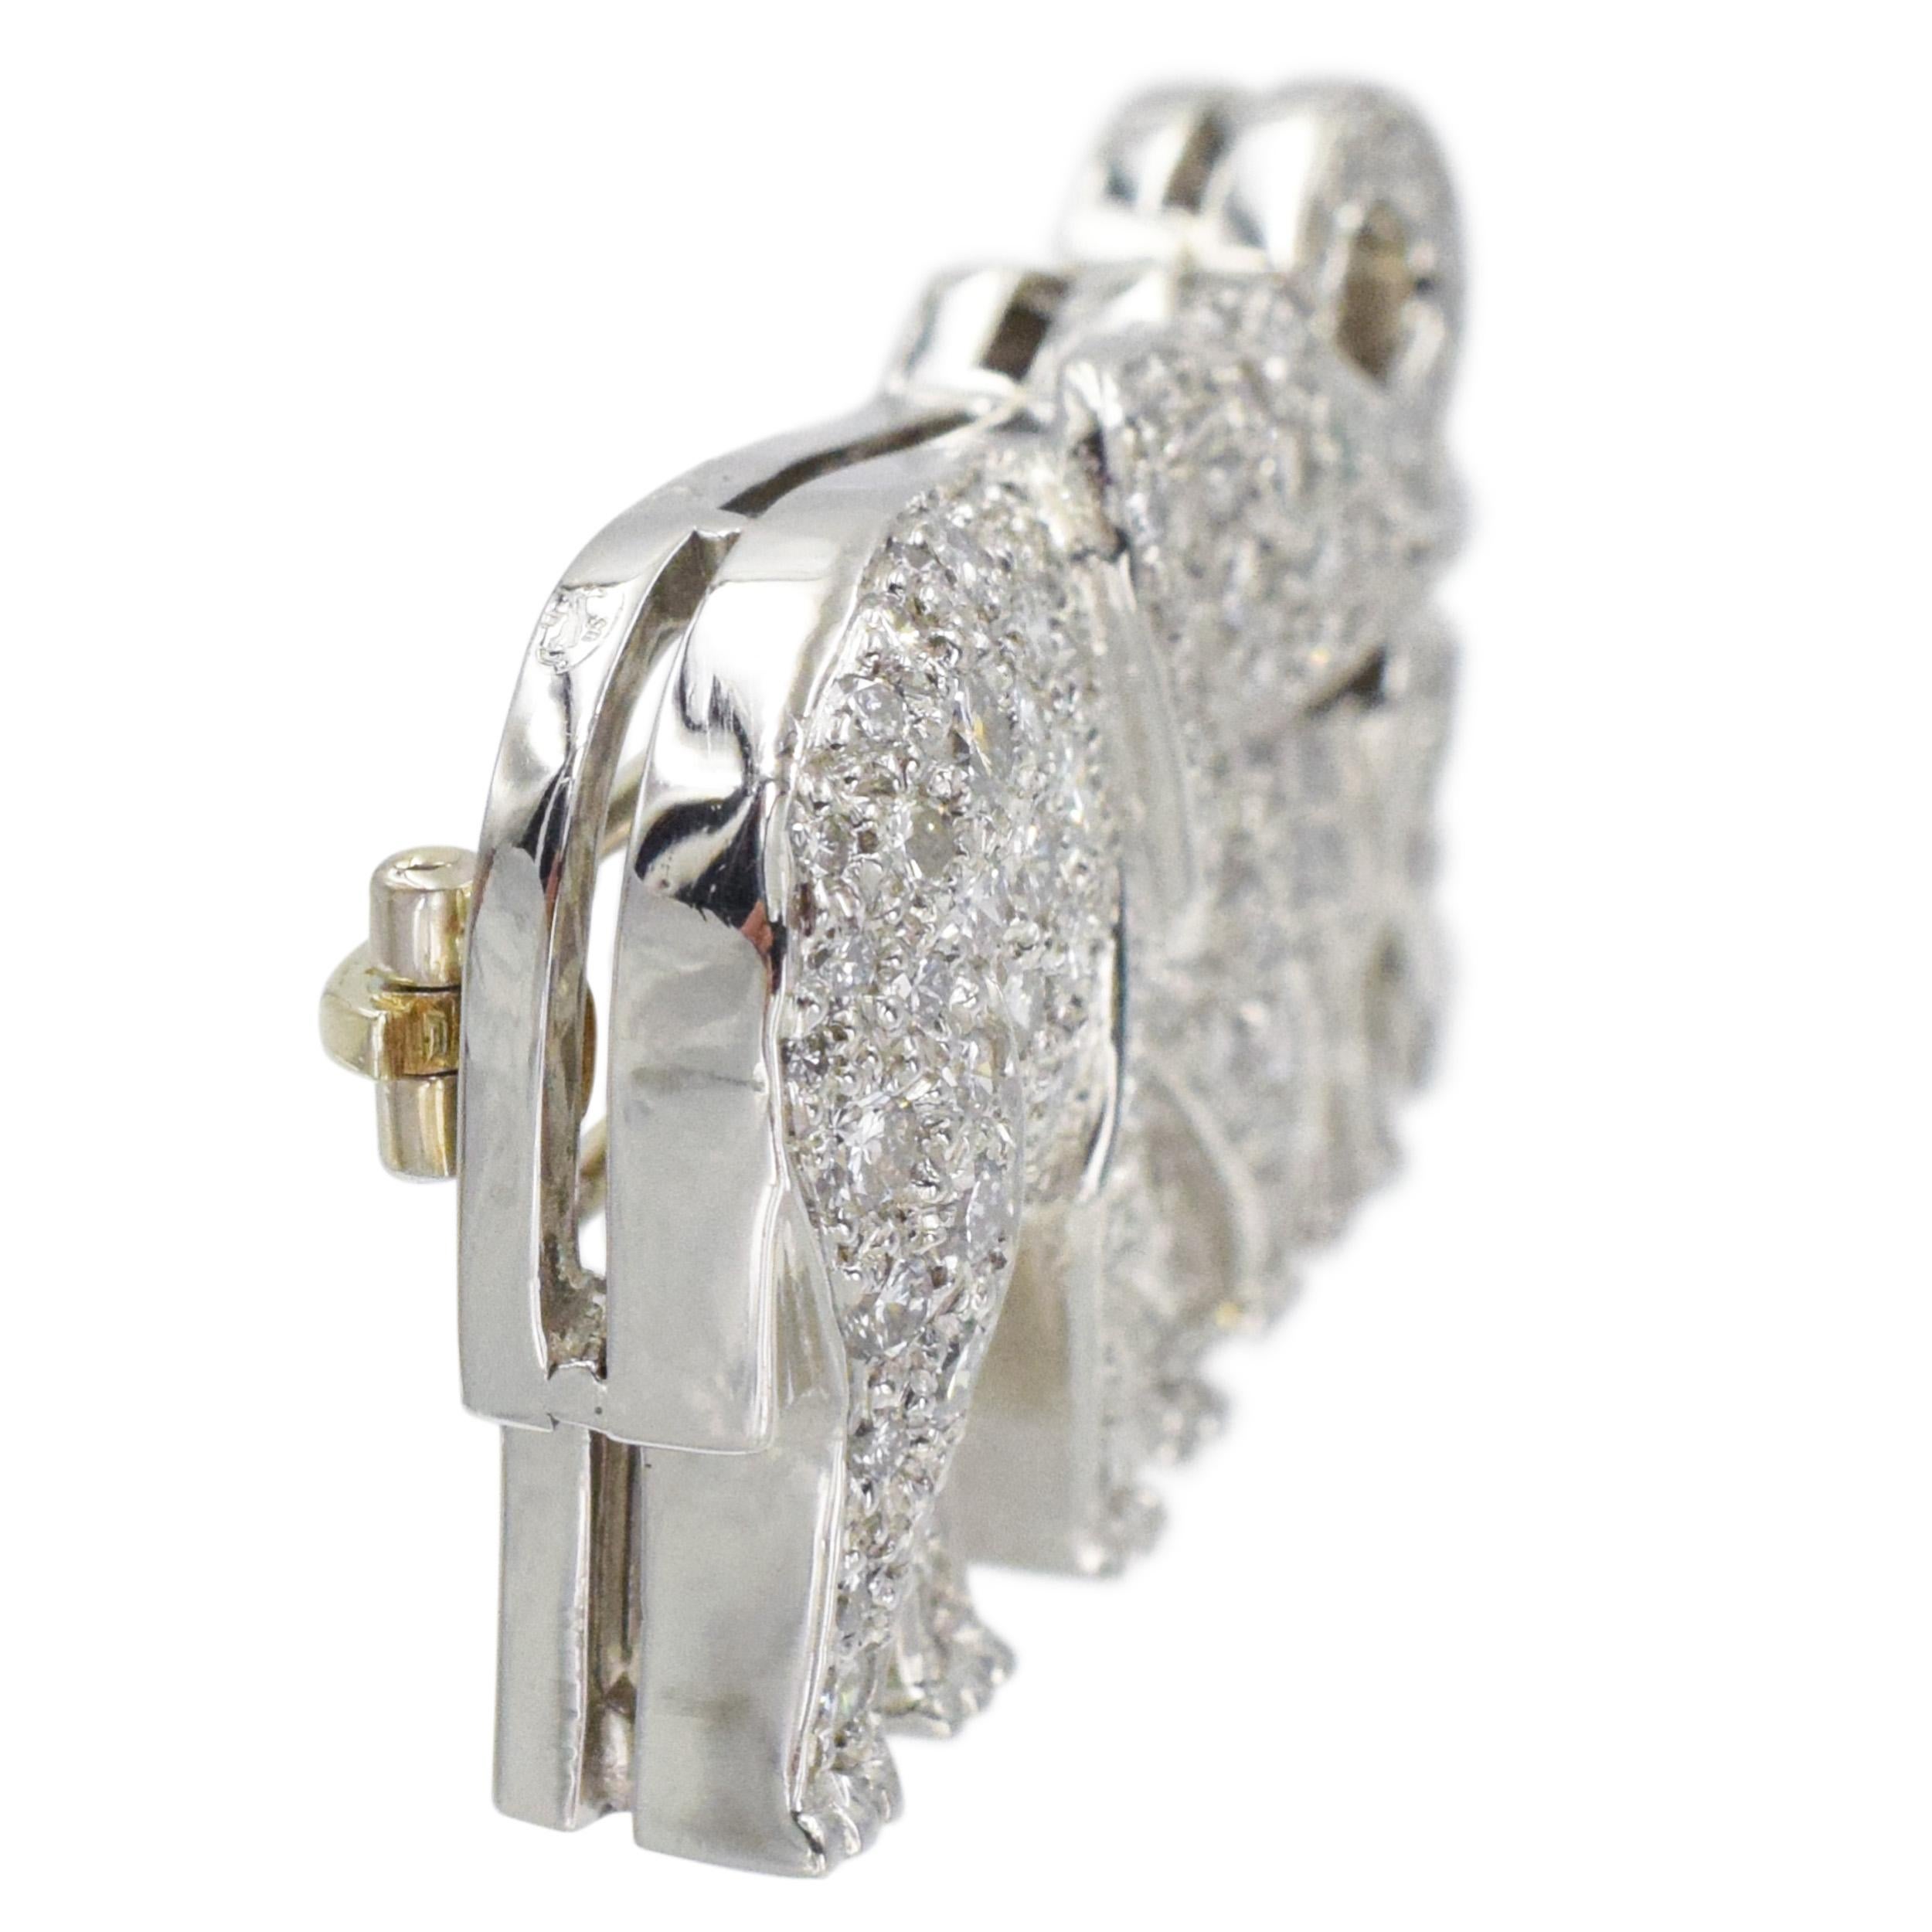 Artist Cartier Diamond and Emerald Elephant Brooch and Earrings Set In Platinum.